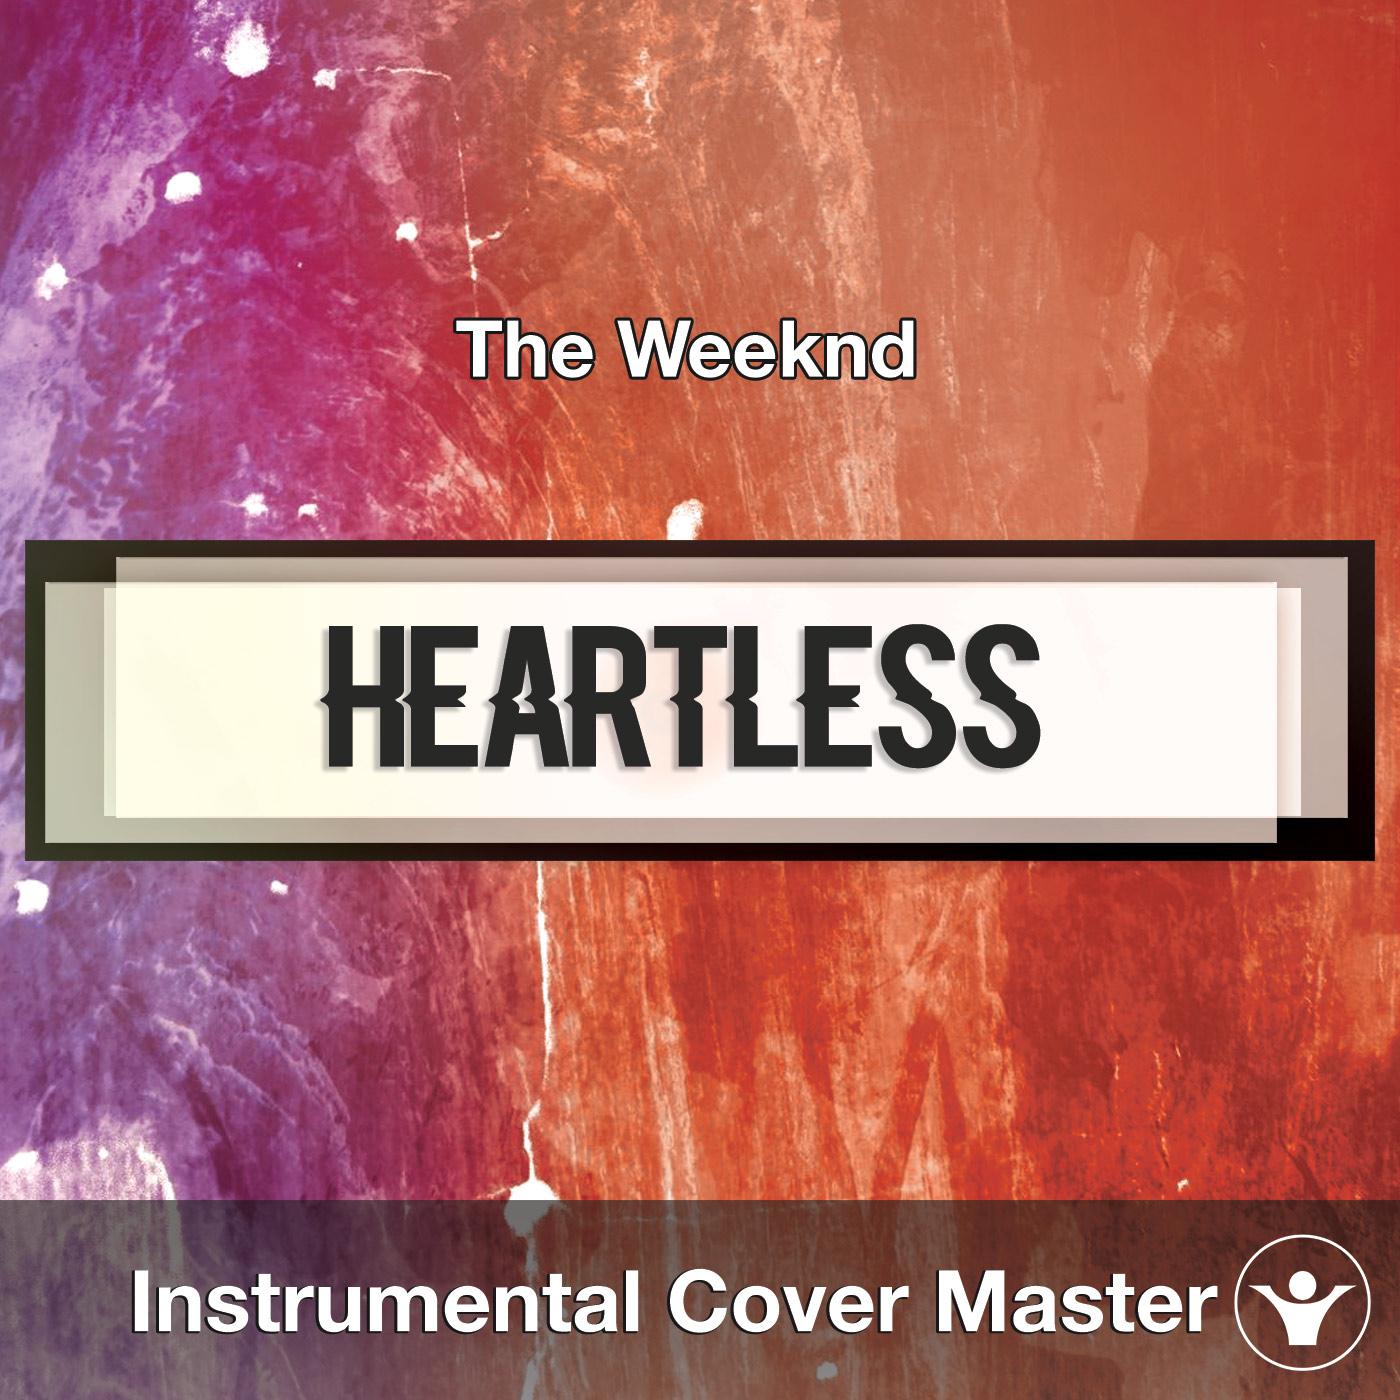 The Weeknd - Heartless Cover)